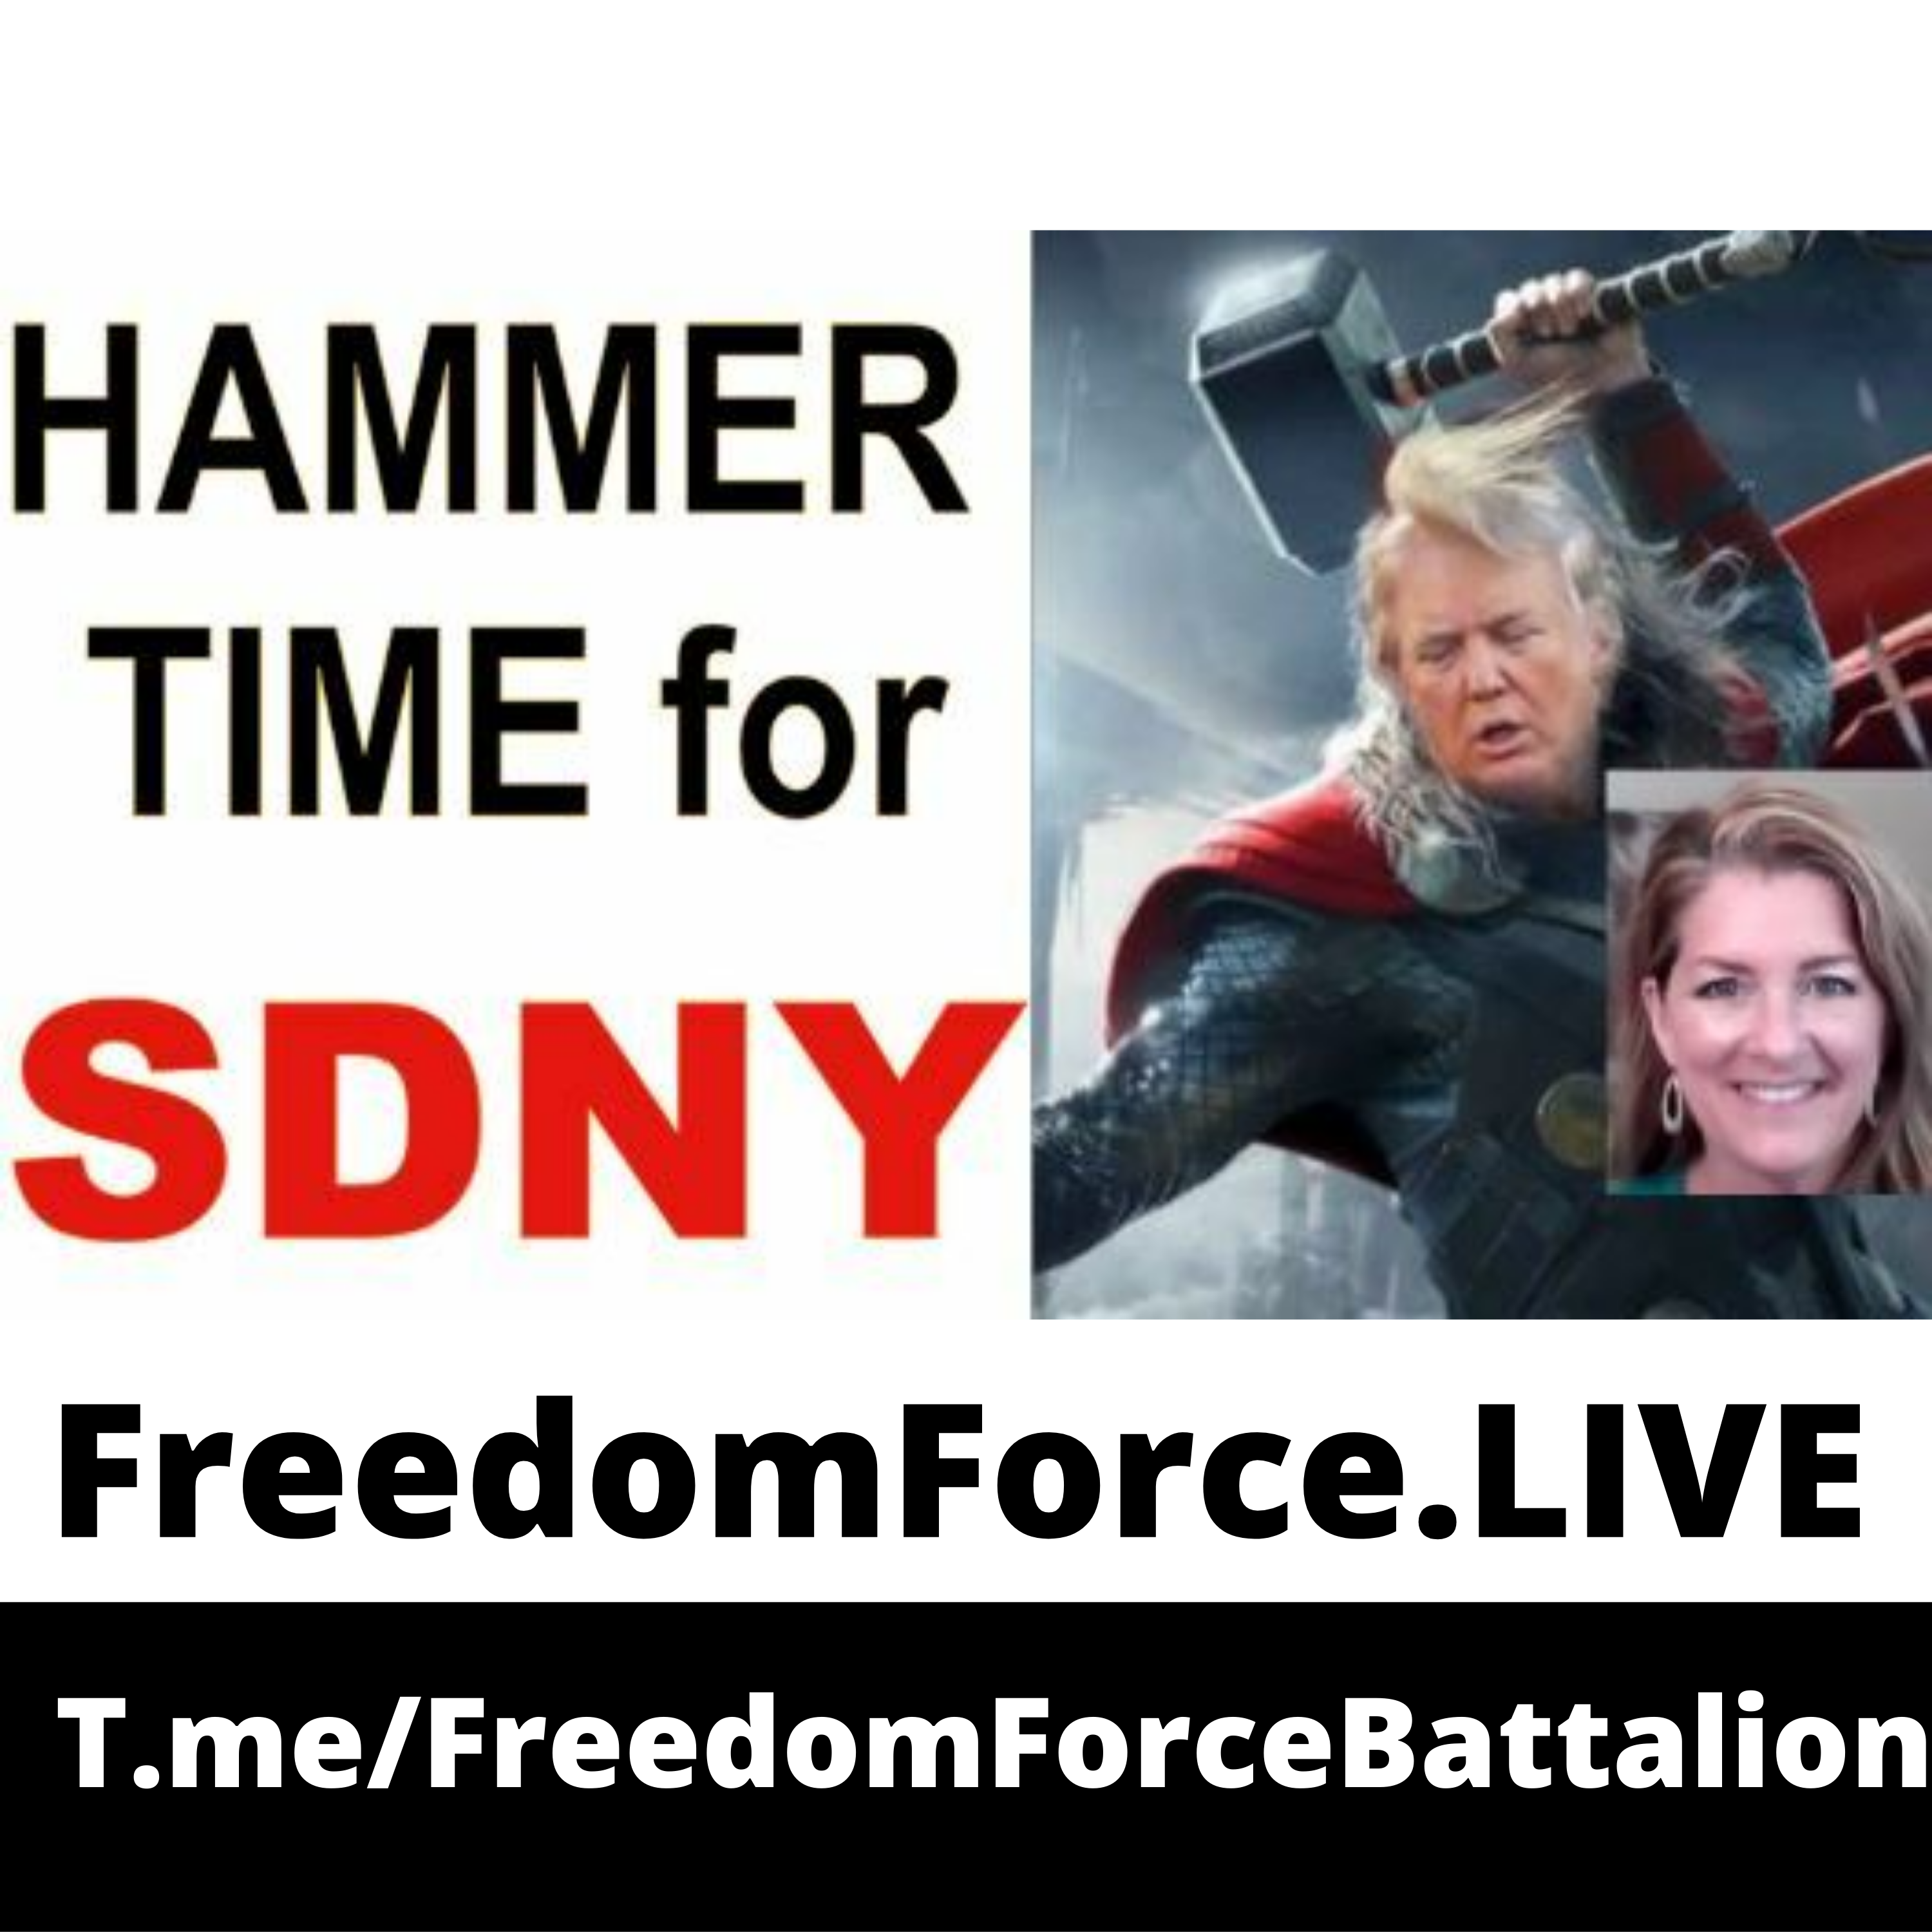 Hammer Time For SDNY